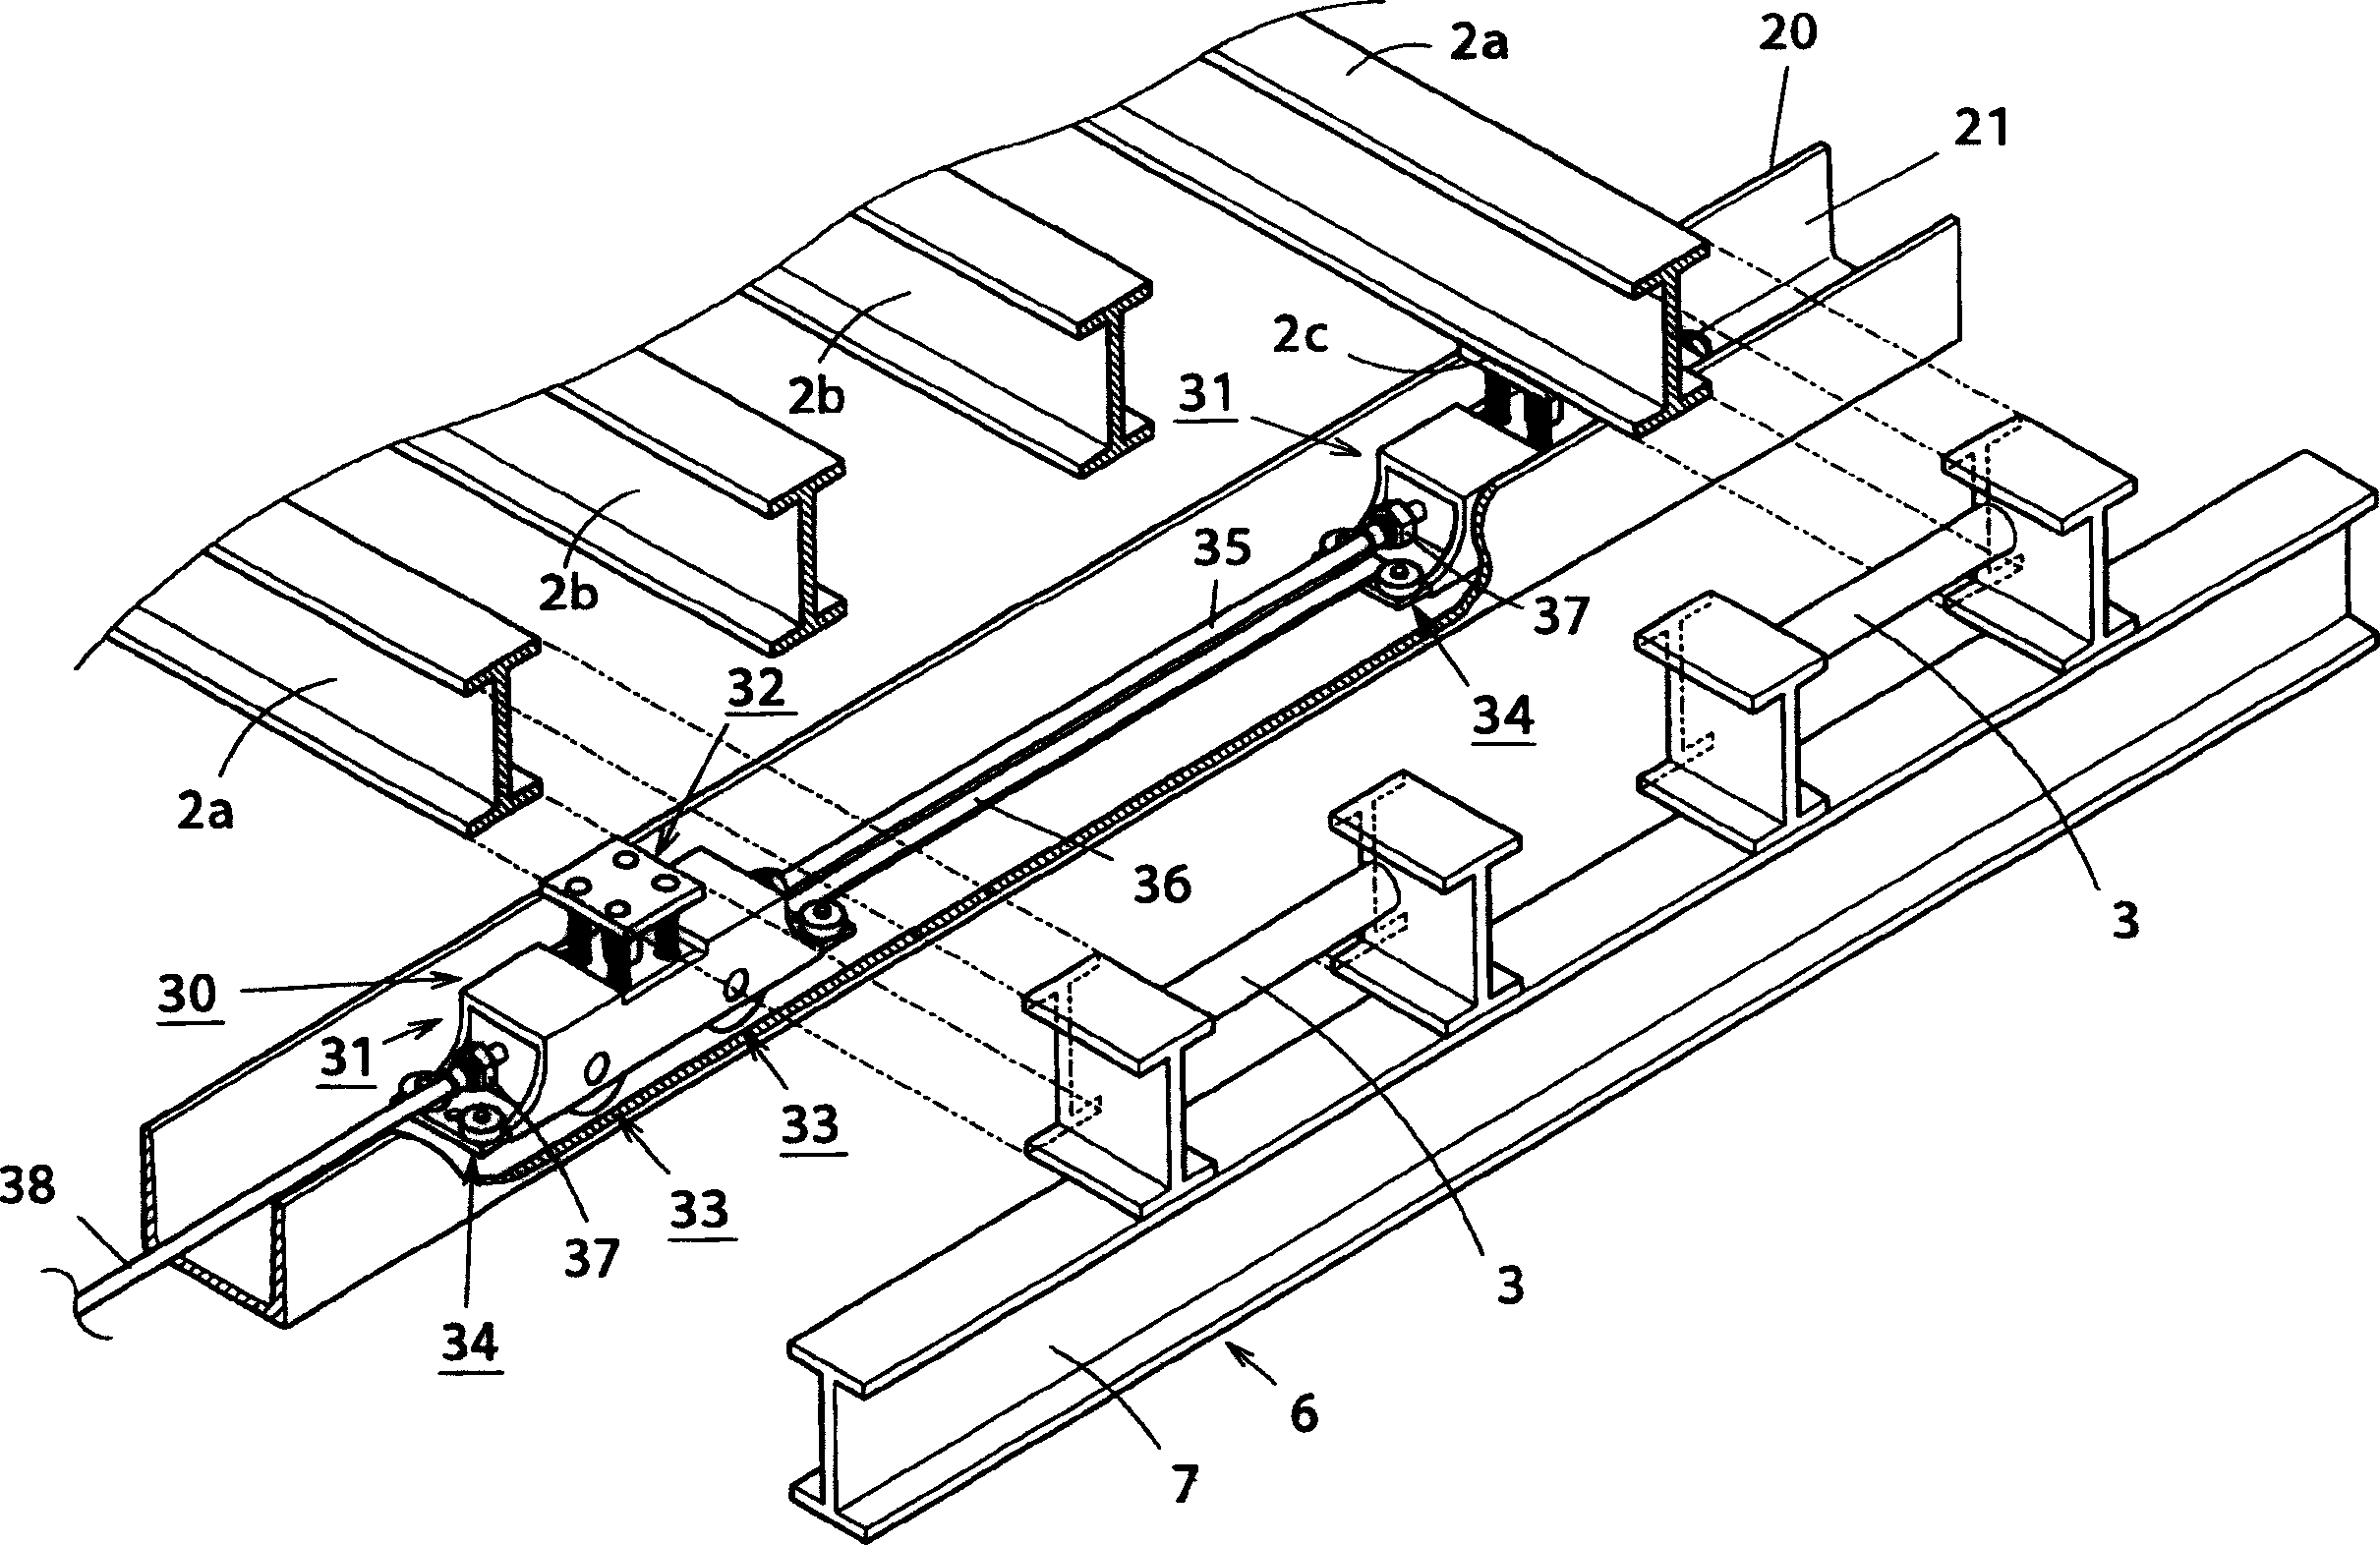 Heavy goods carrying table and method for using same